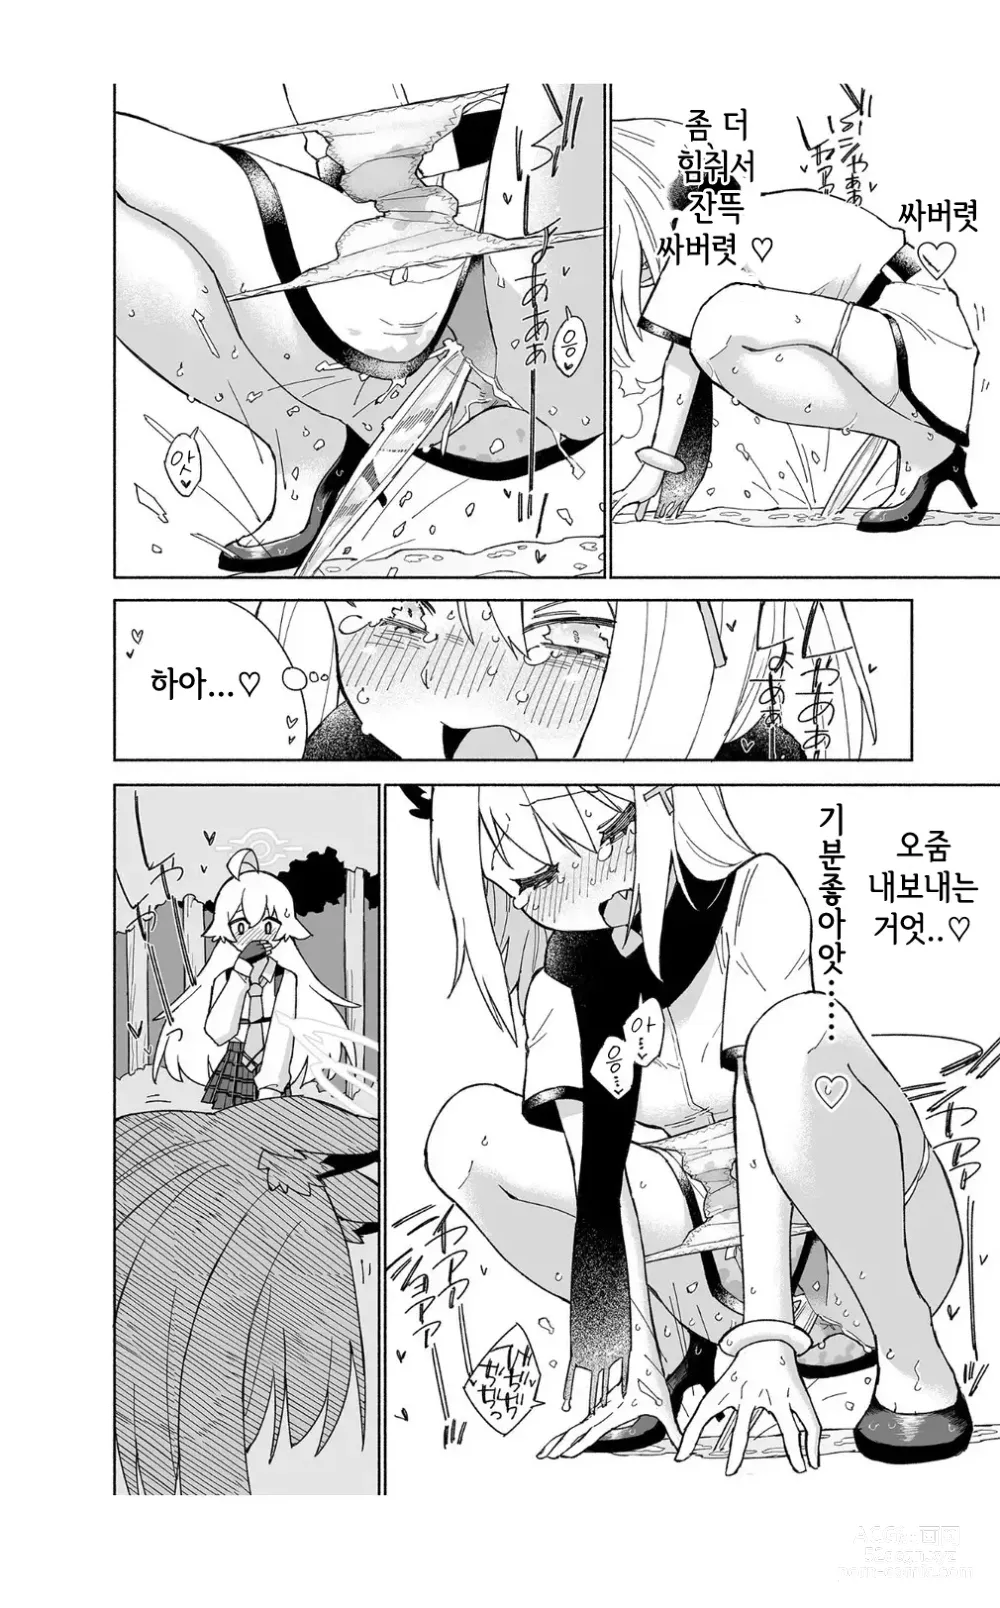 Page 29 of doujinshi 늑대의 물